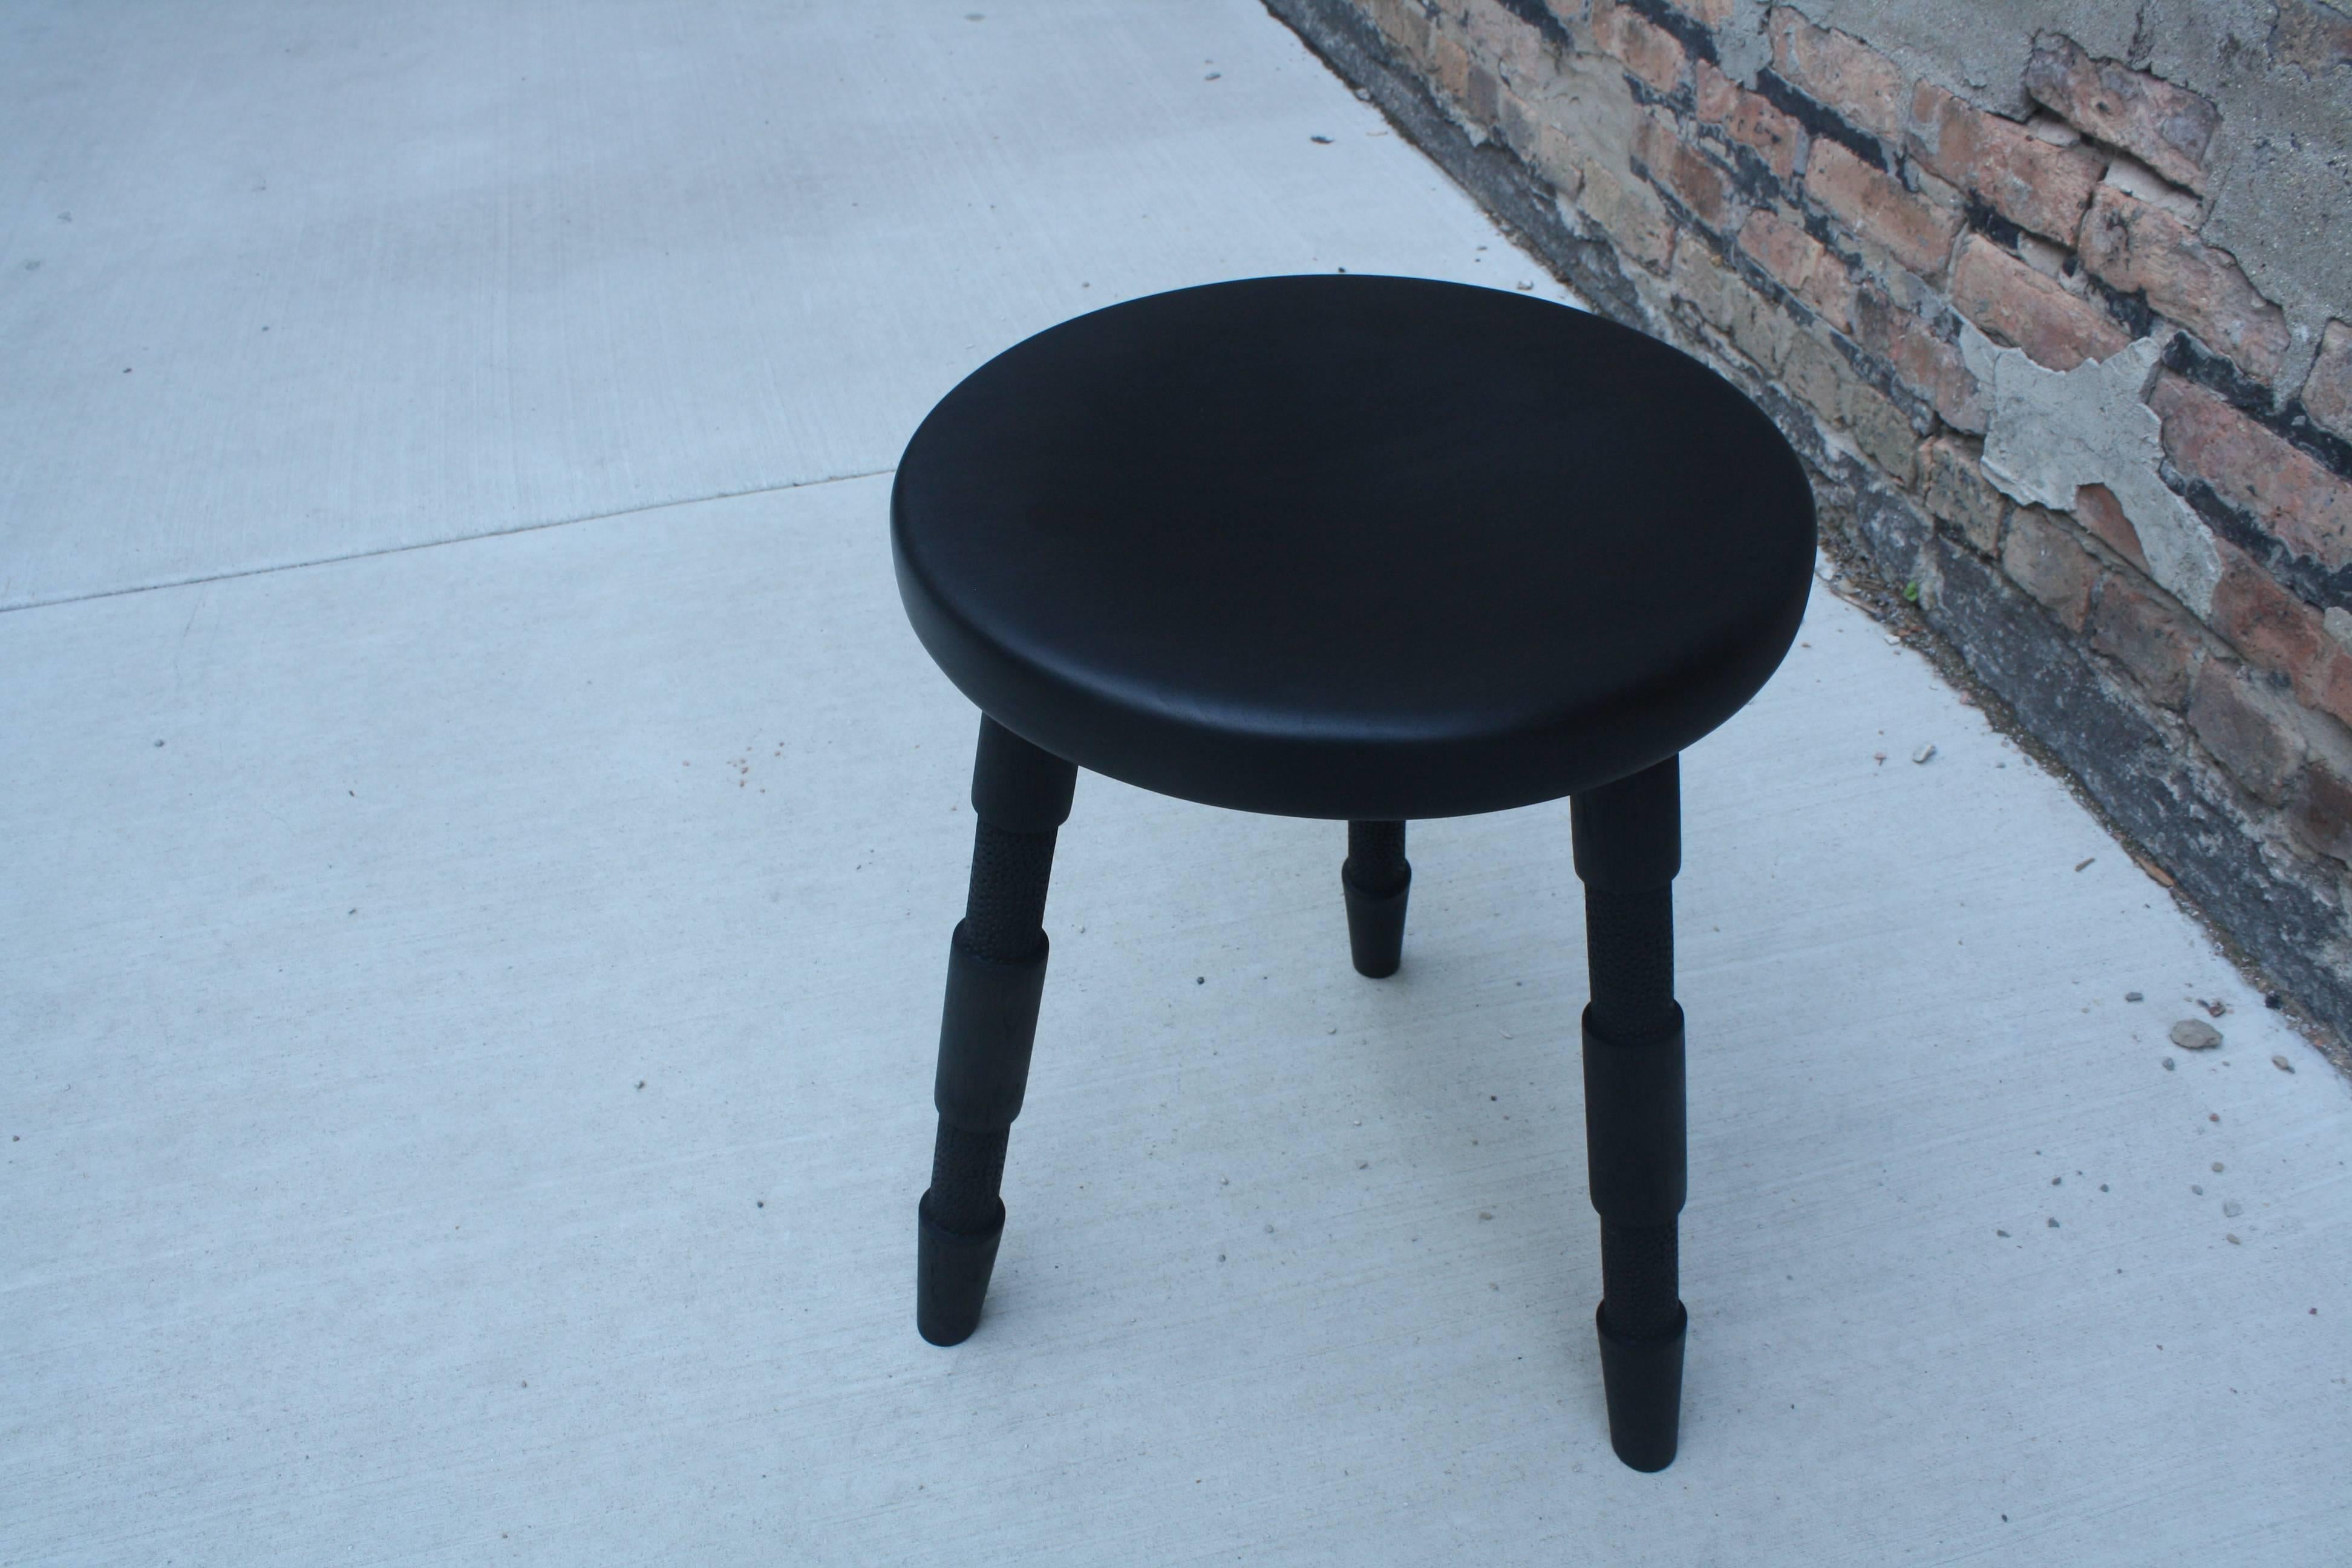 Saddle, Handmade Wood Stool With Textured Legs and a Carved Seat In New Condition For Sale In Chicago, IL